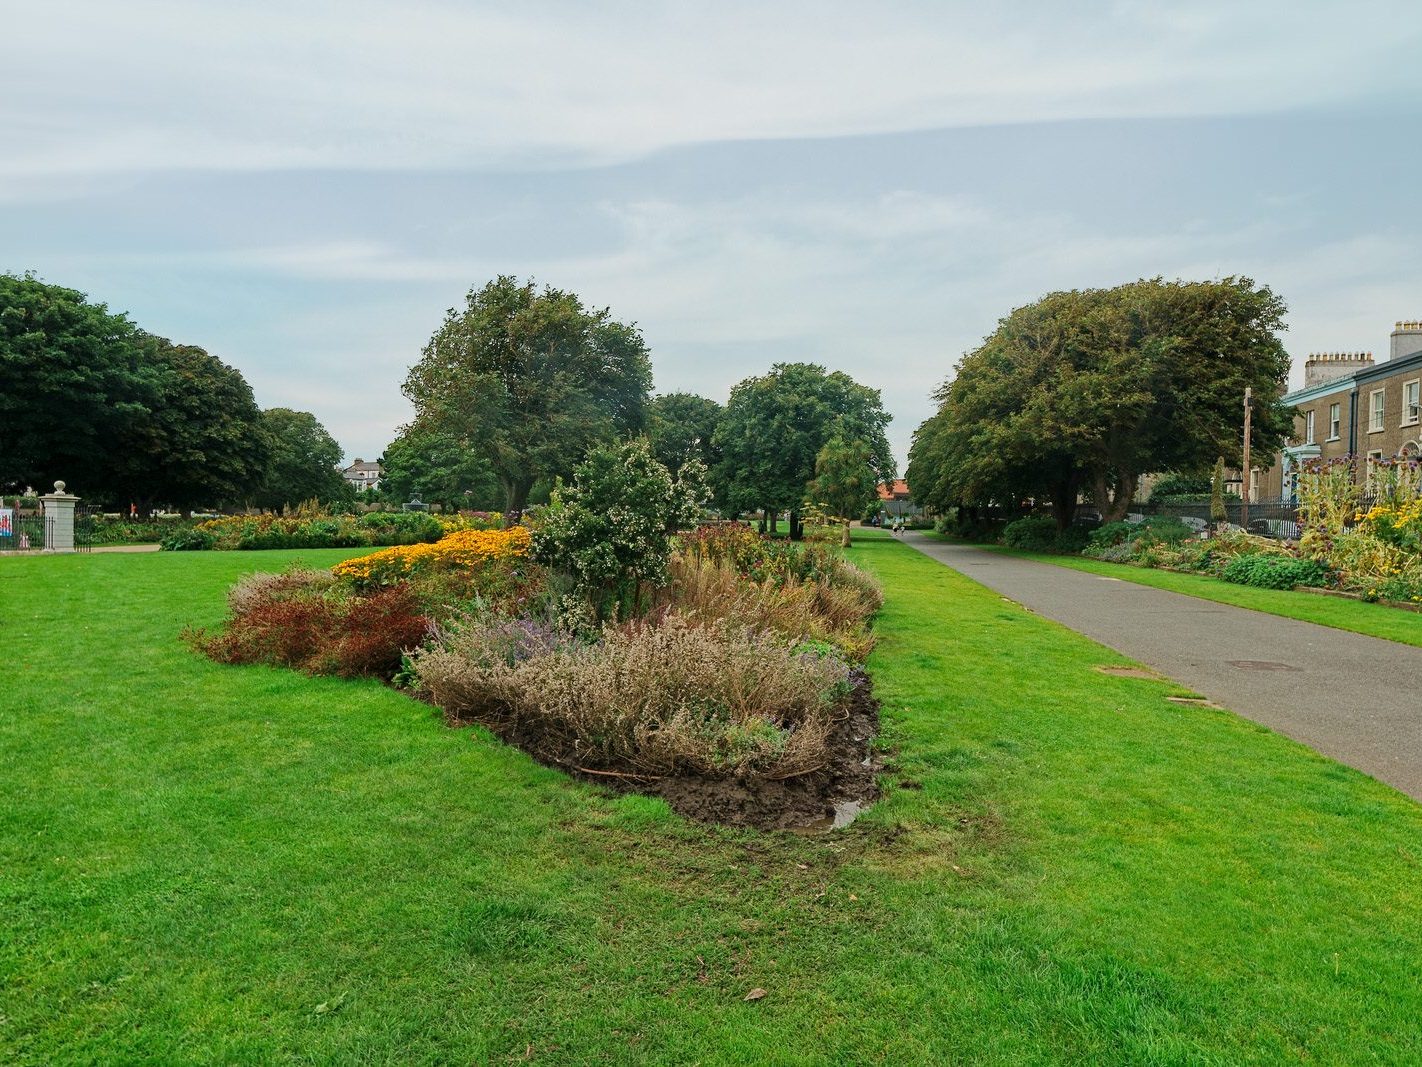 I REALLY LIKE THE PEOPLE'S PARK [AN ATTRACTIVE PUBLIC SPACE IN DUN LAOGHAIRE] 004